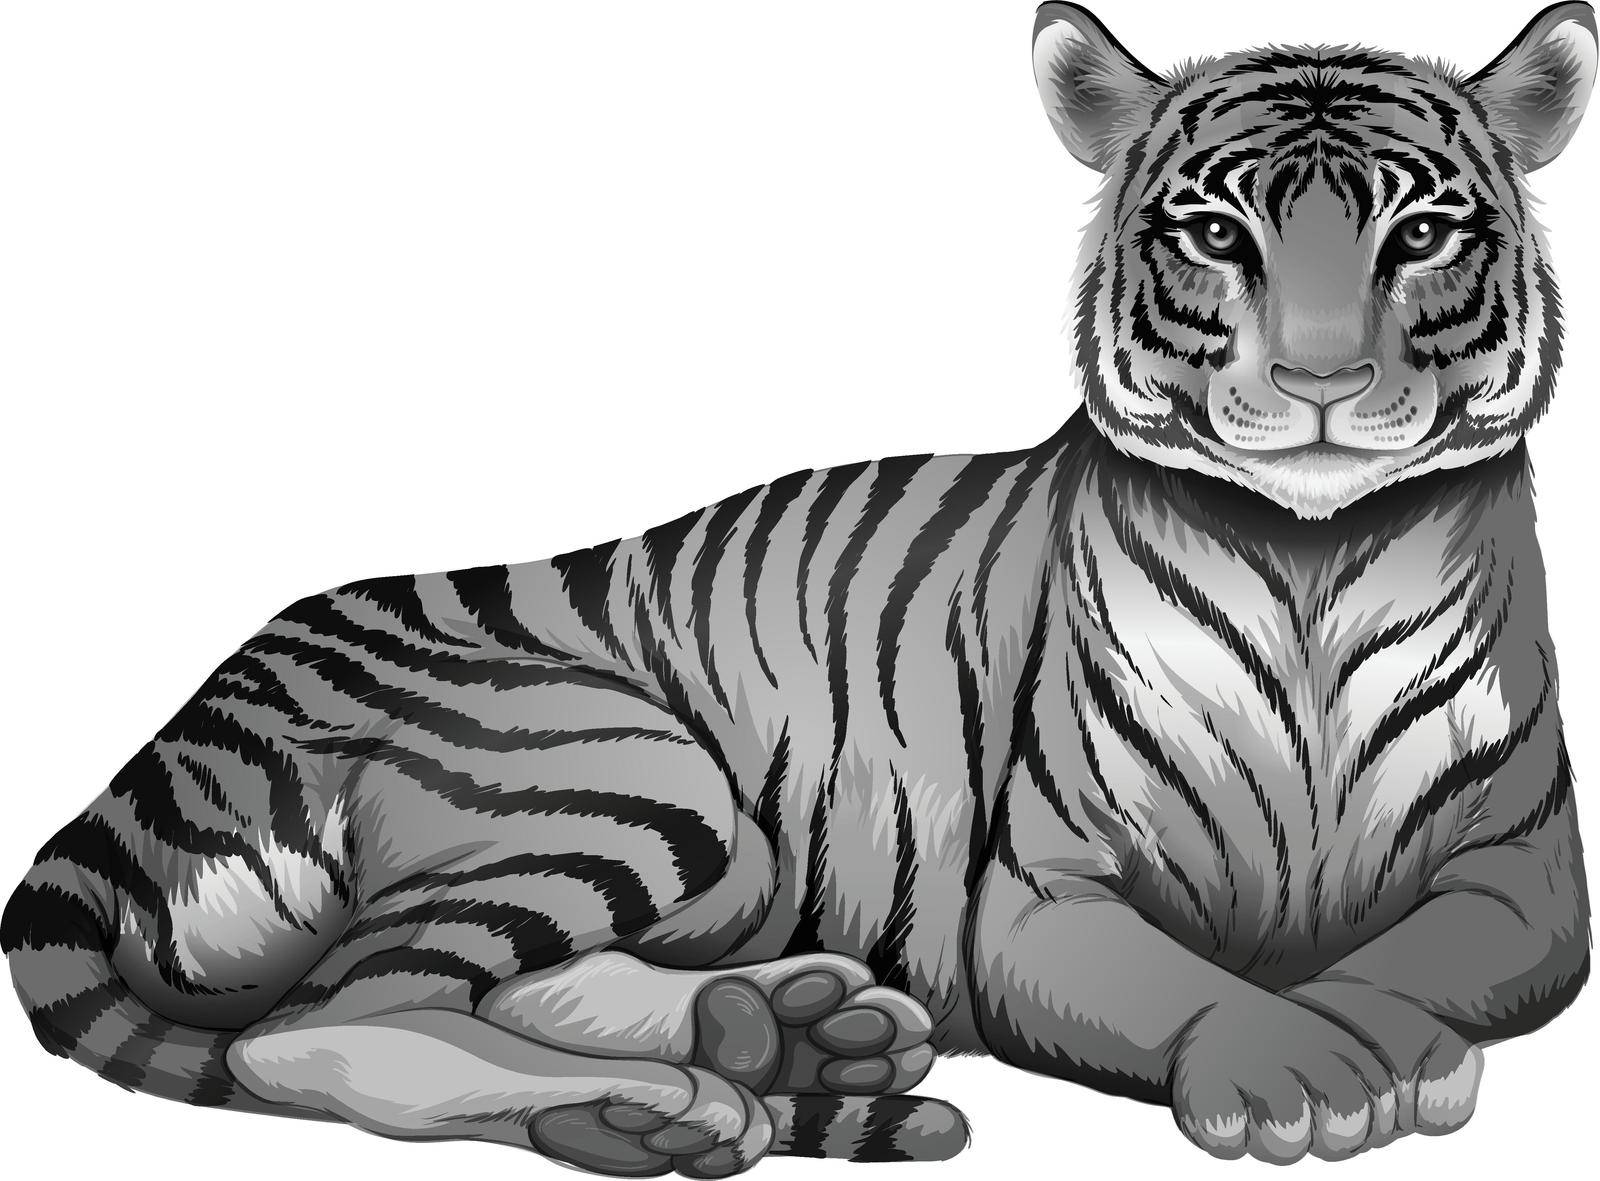 Illustration of a grey tiger on a white background